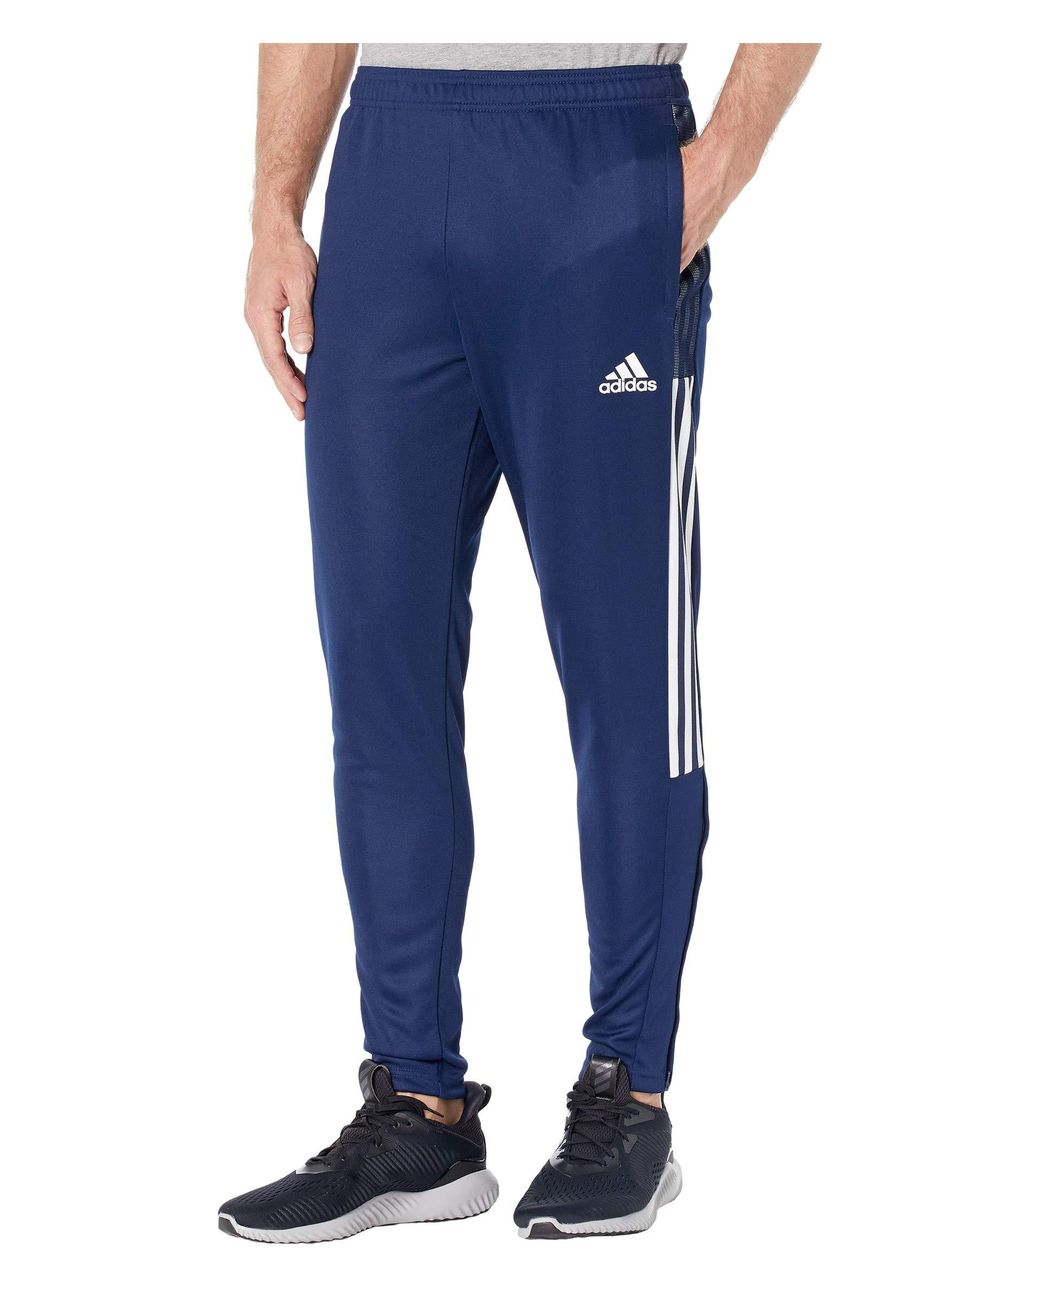 adidas Synthetic Tiro '21 Pants in Navy (Blue) for Men - Lyst